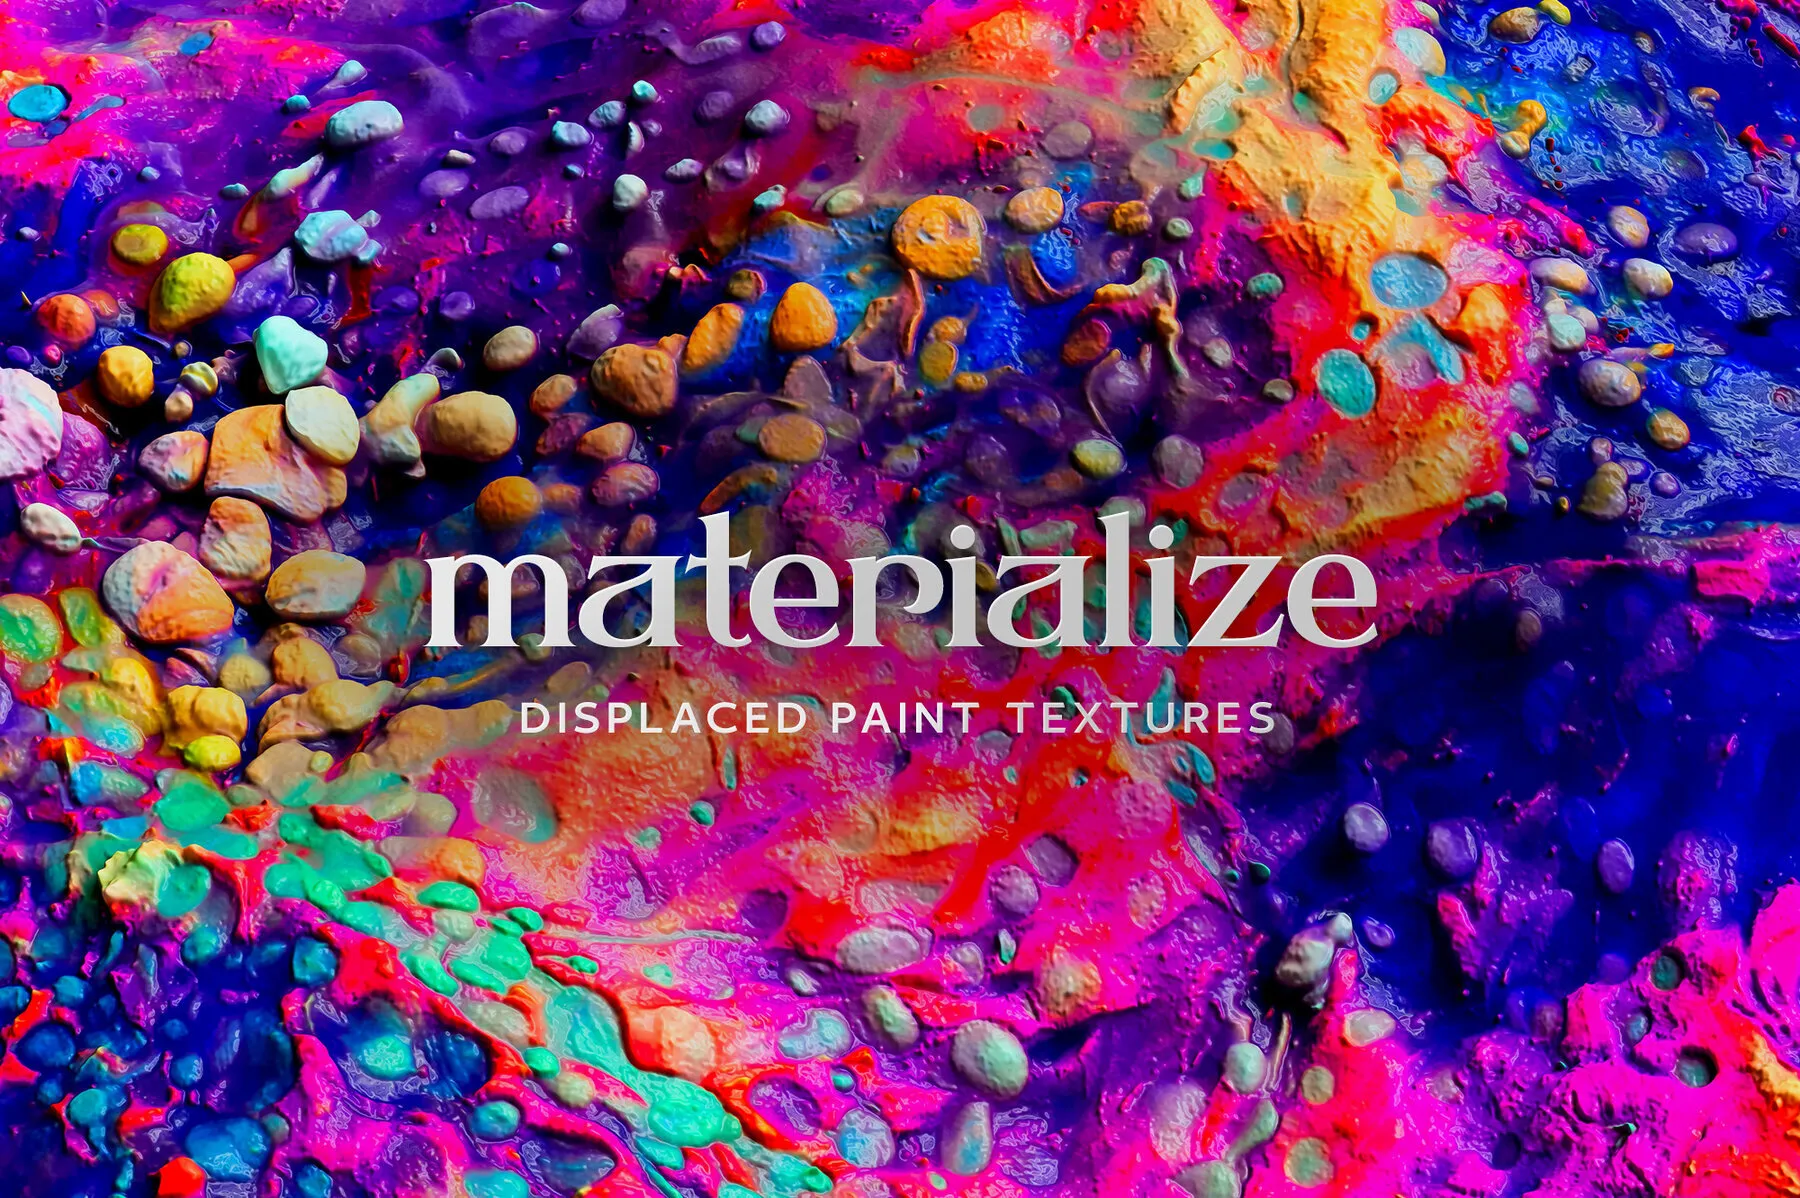 Materialize – Displaced Paint Textures